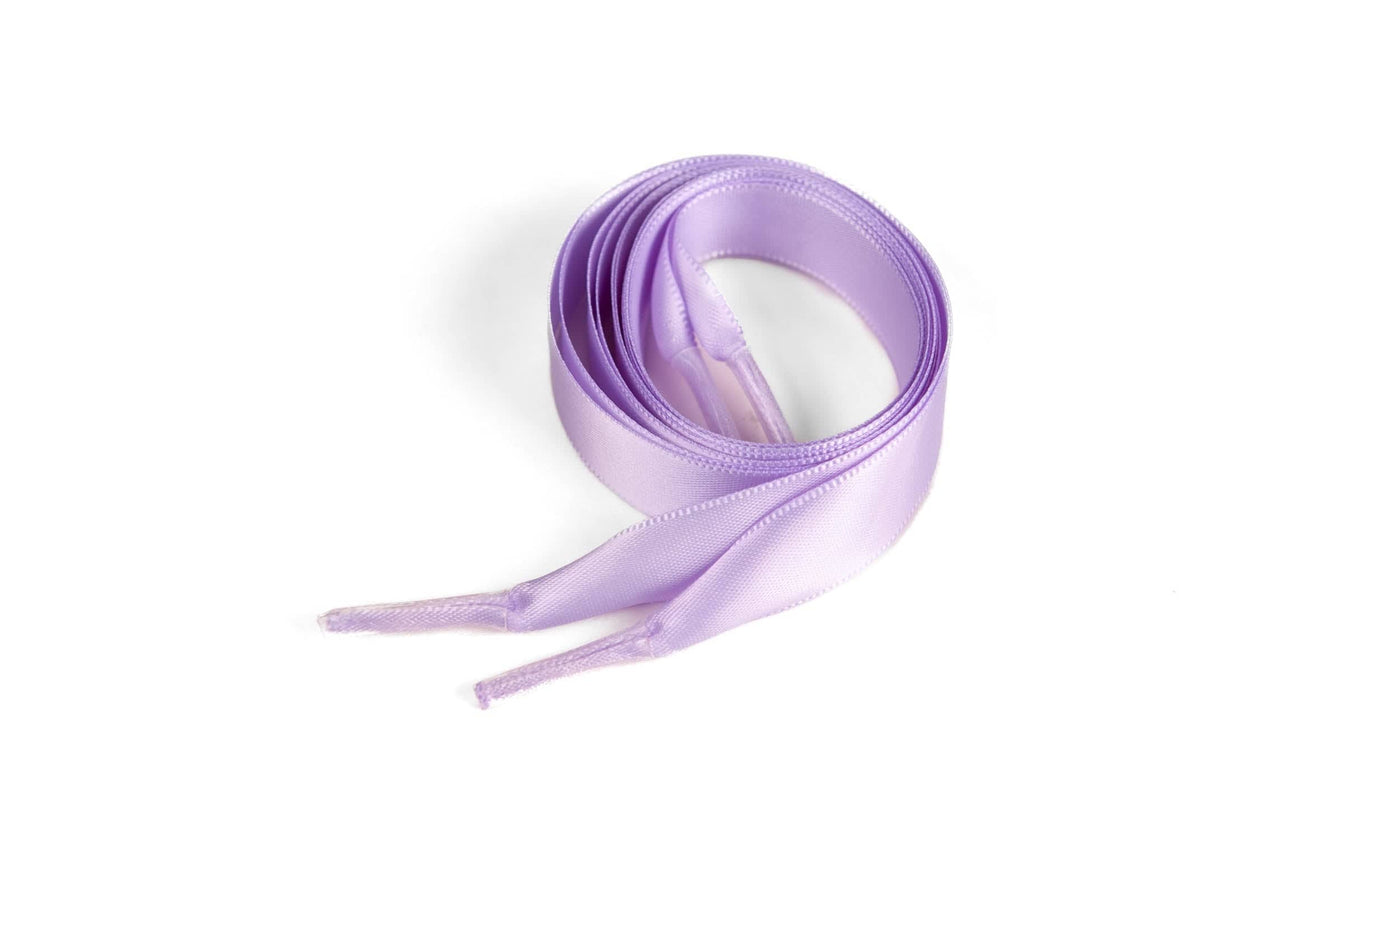 Satin Ribbon 5/8" Premium Quality Shoelaces - 48" Inch Length Orchid